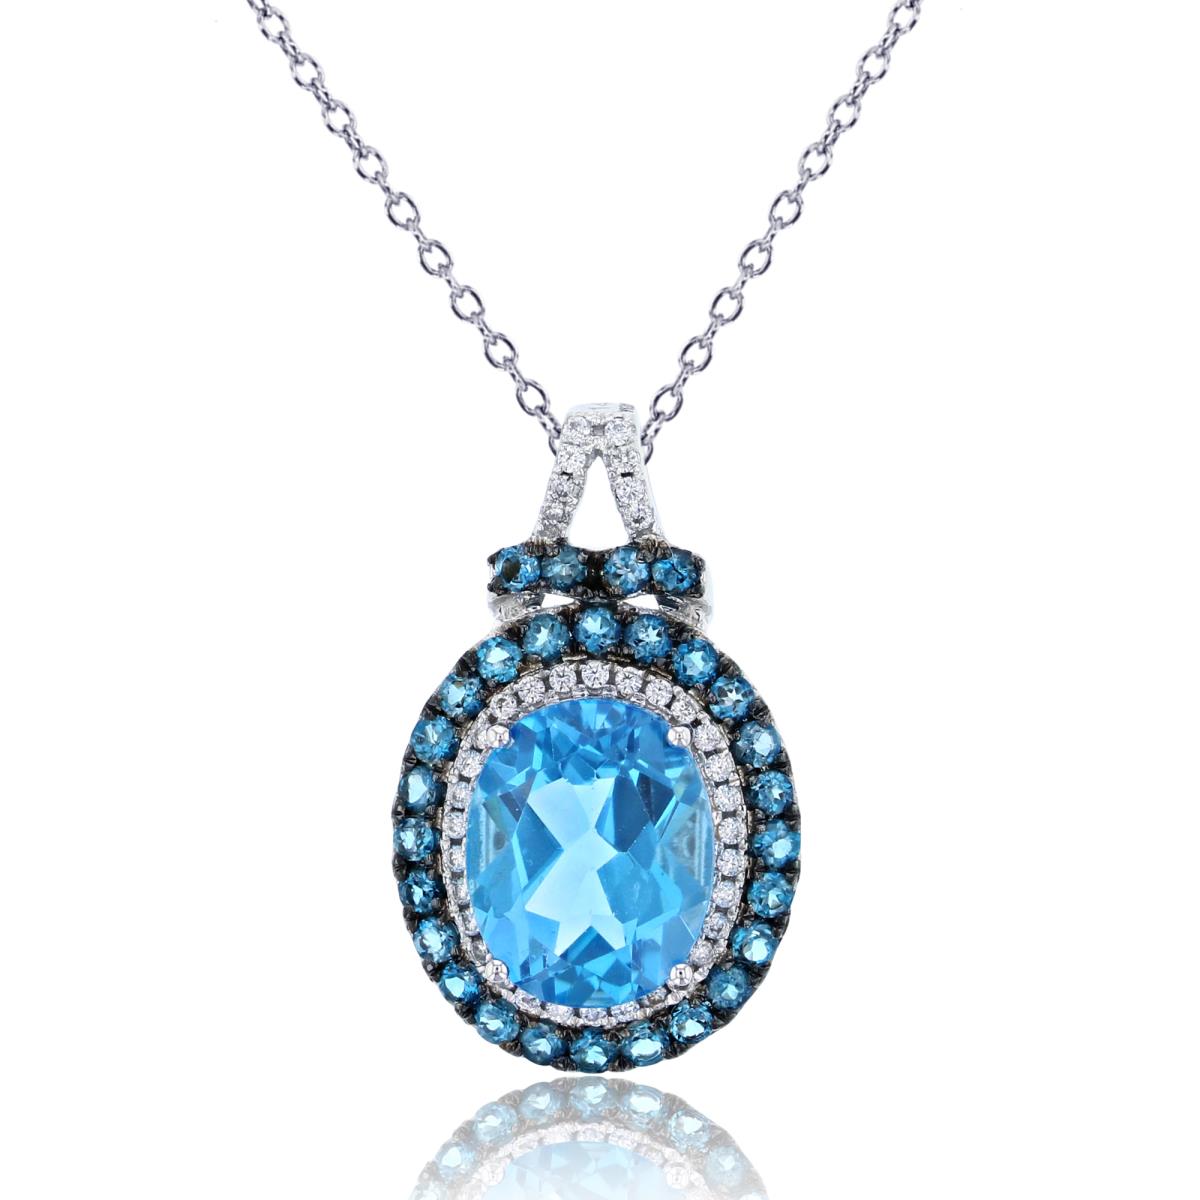 14K White Gold 10x8mm Ov Blue Topaz with 0.13 Diamonds & 1.5mm Rd London Blue Topaz Halo 18" Rope Chain Necklace